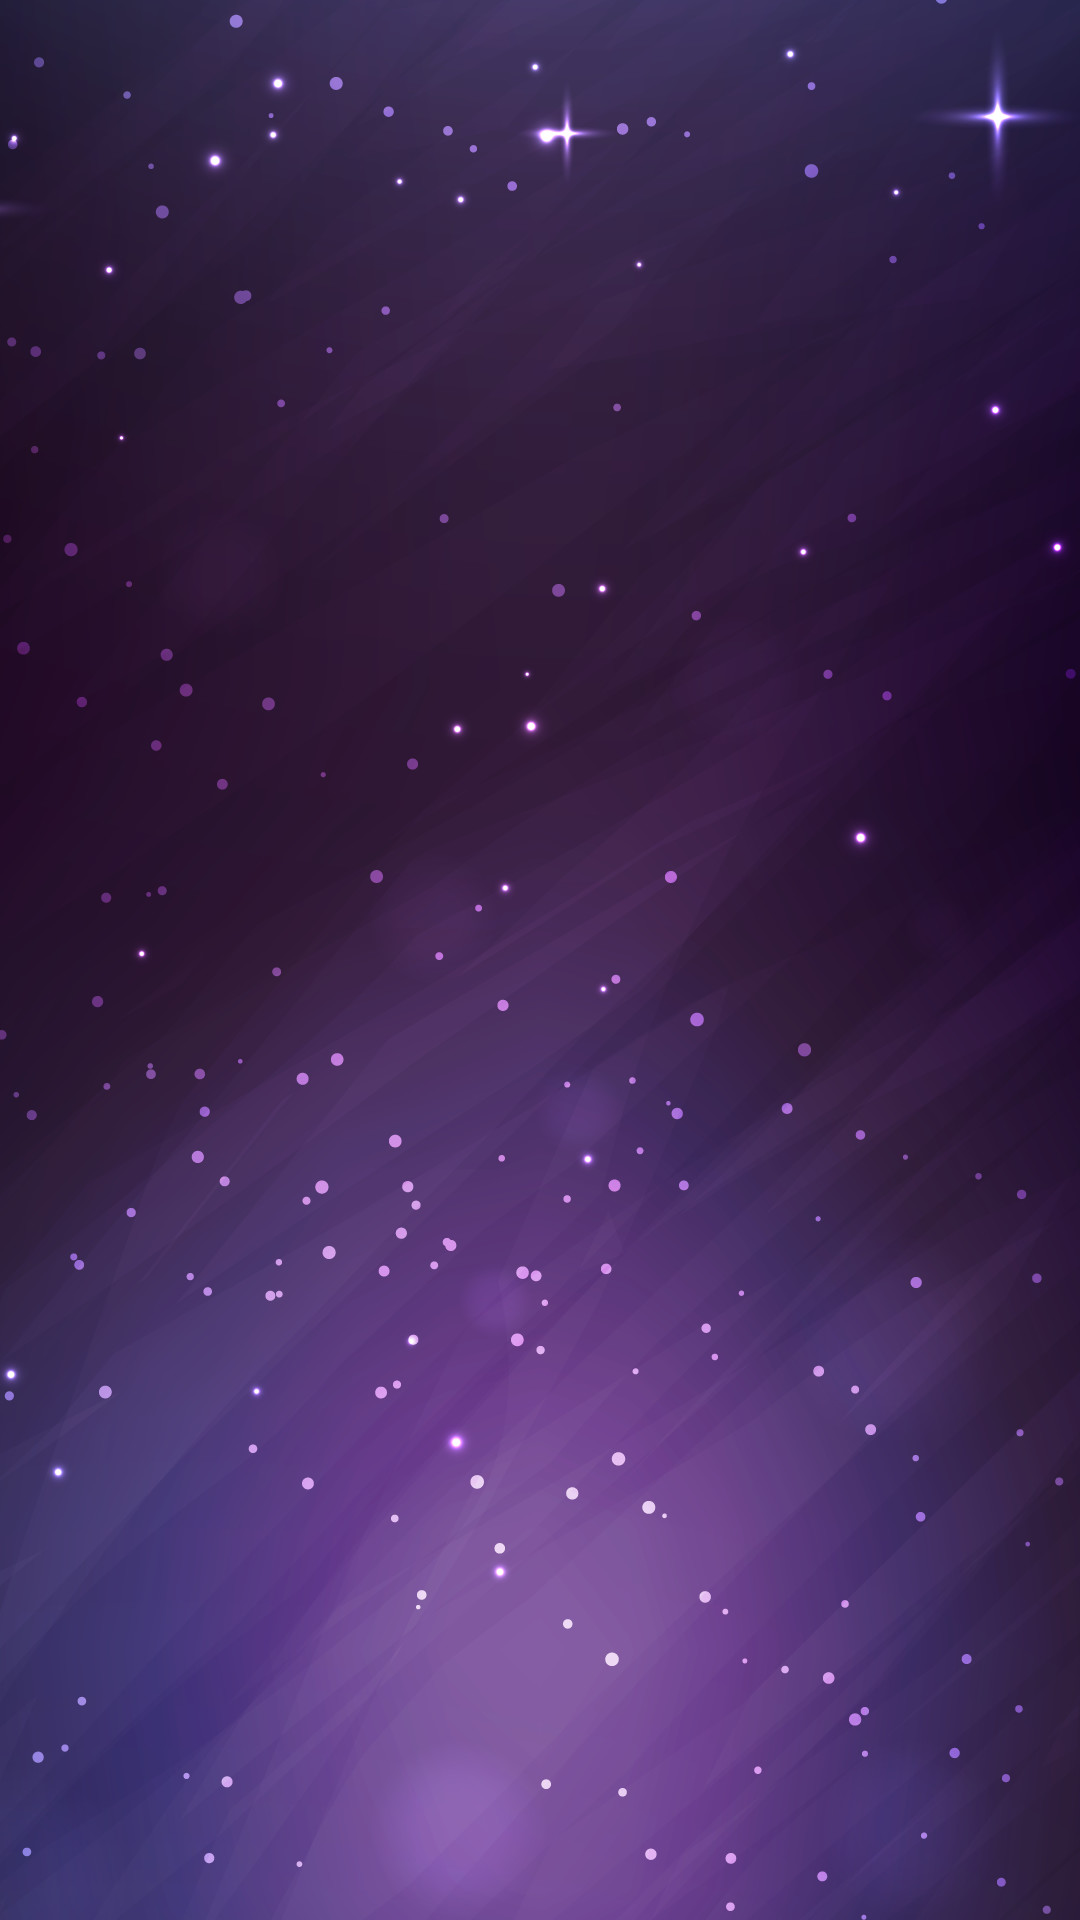 1080x1920 Ultra HD Purple Space Wallpaper For Your Mobile Phone ...0227